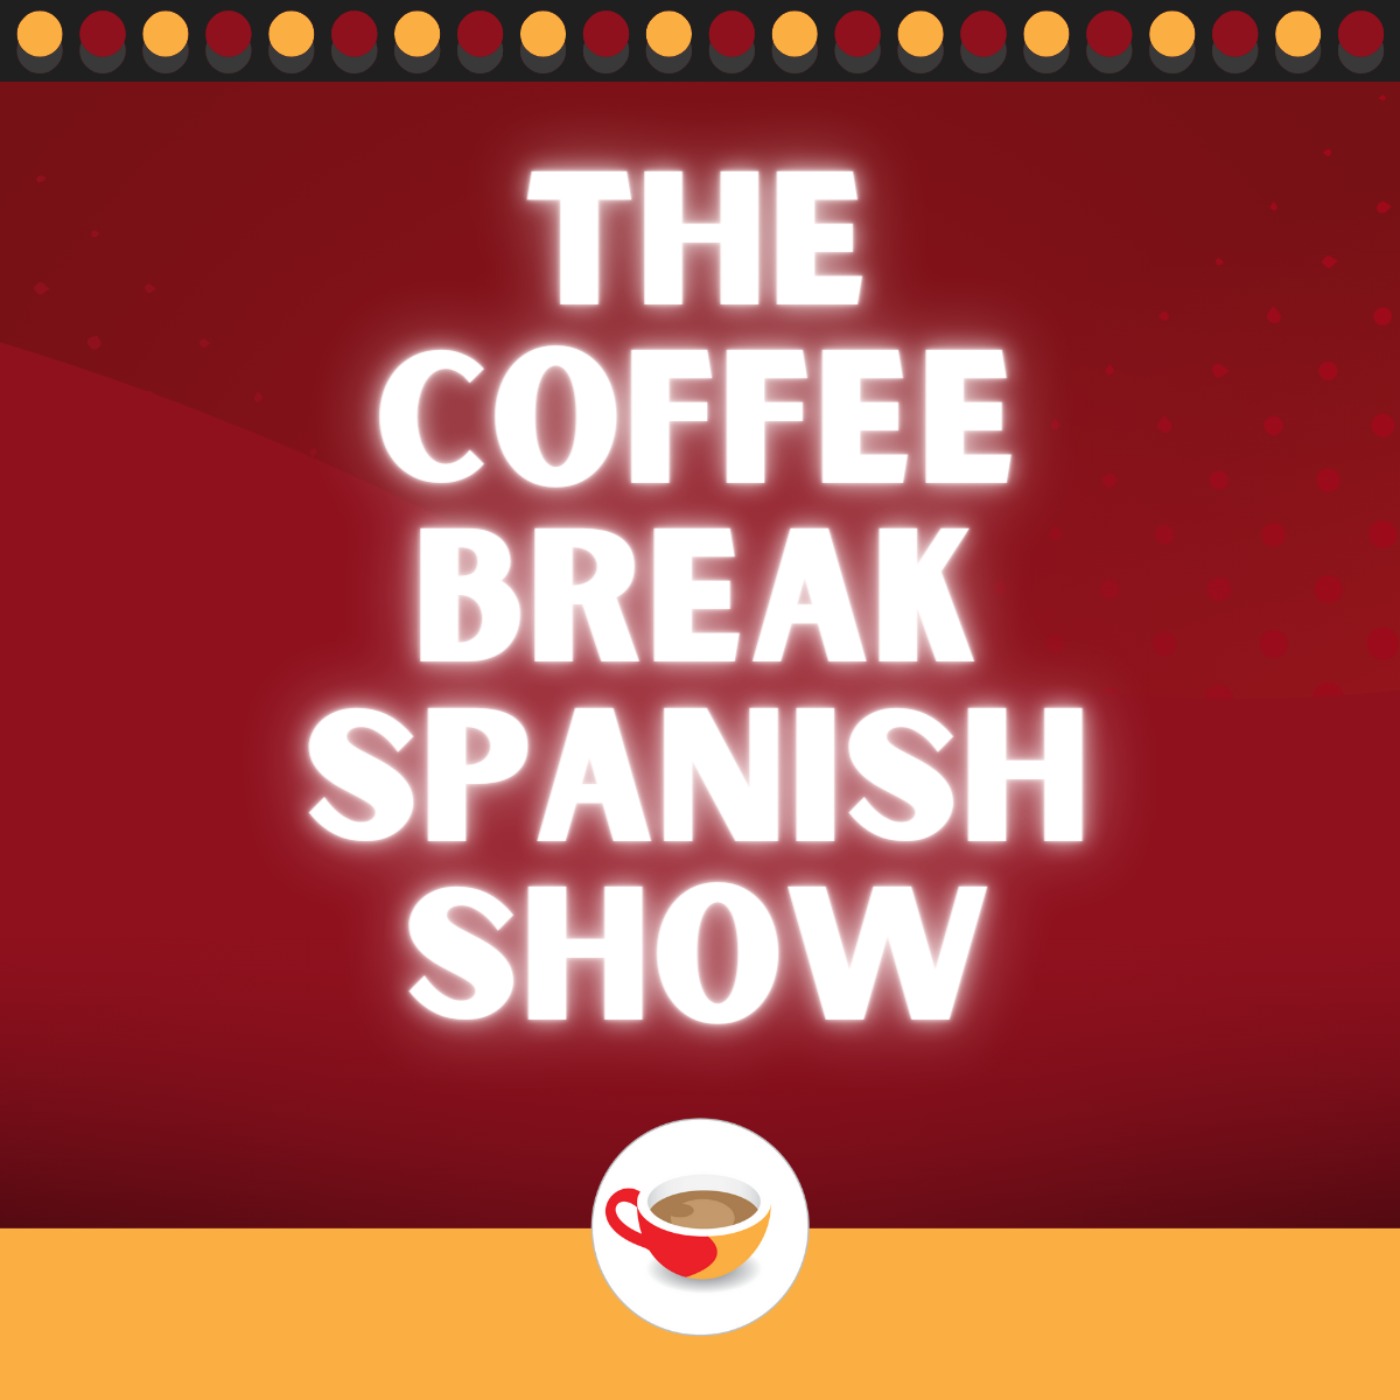 When to use ‘ser’ and ‘estar’ in Spanish | The Coffee Break Spanish Show 1.07